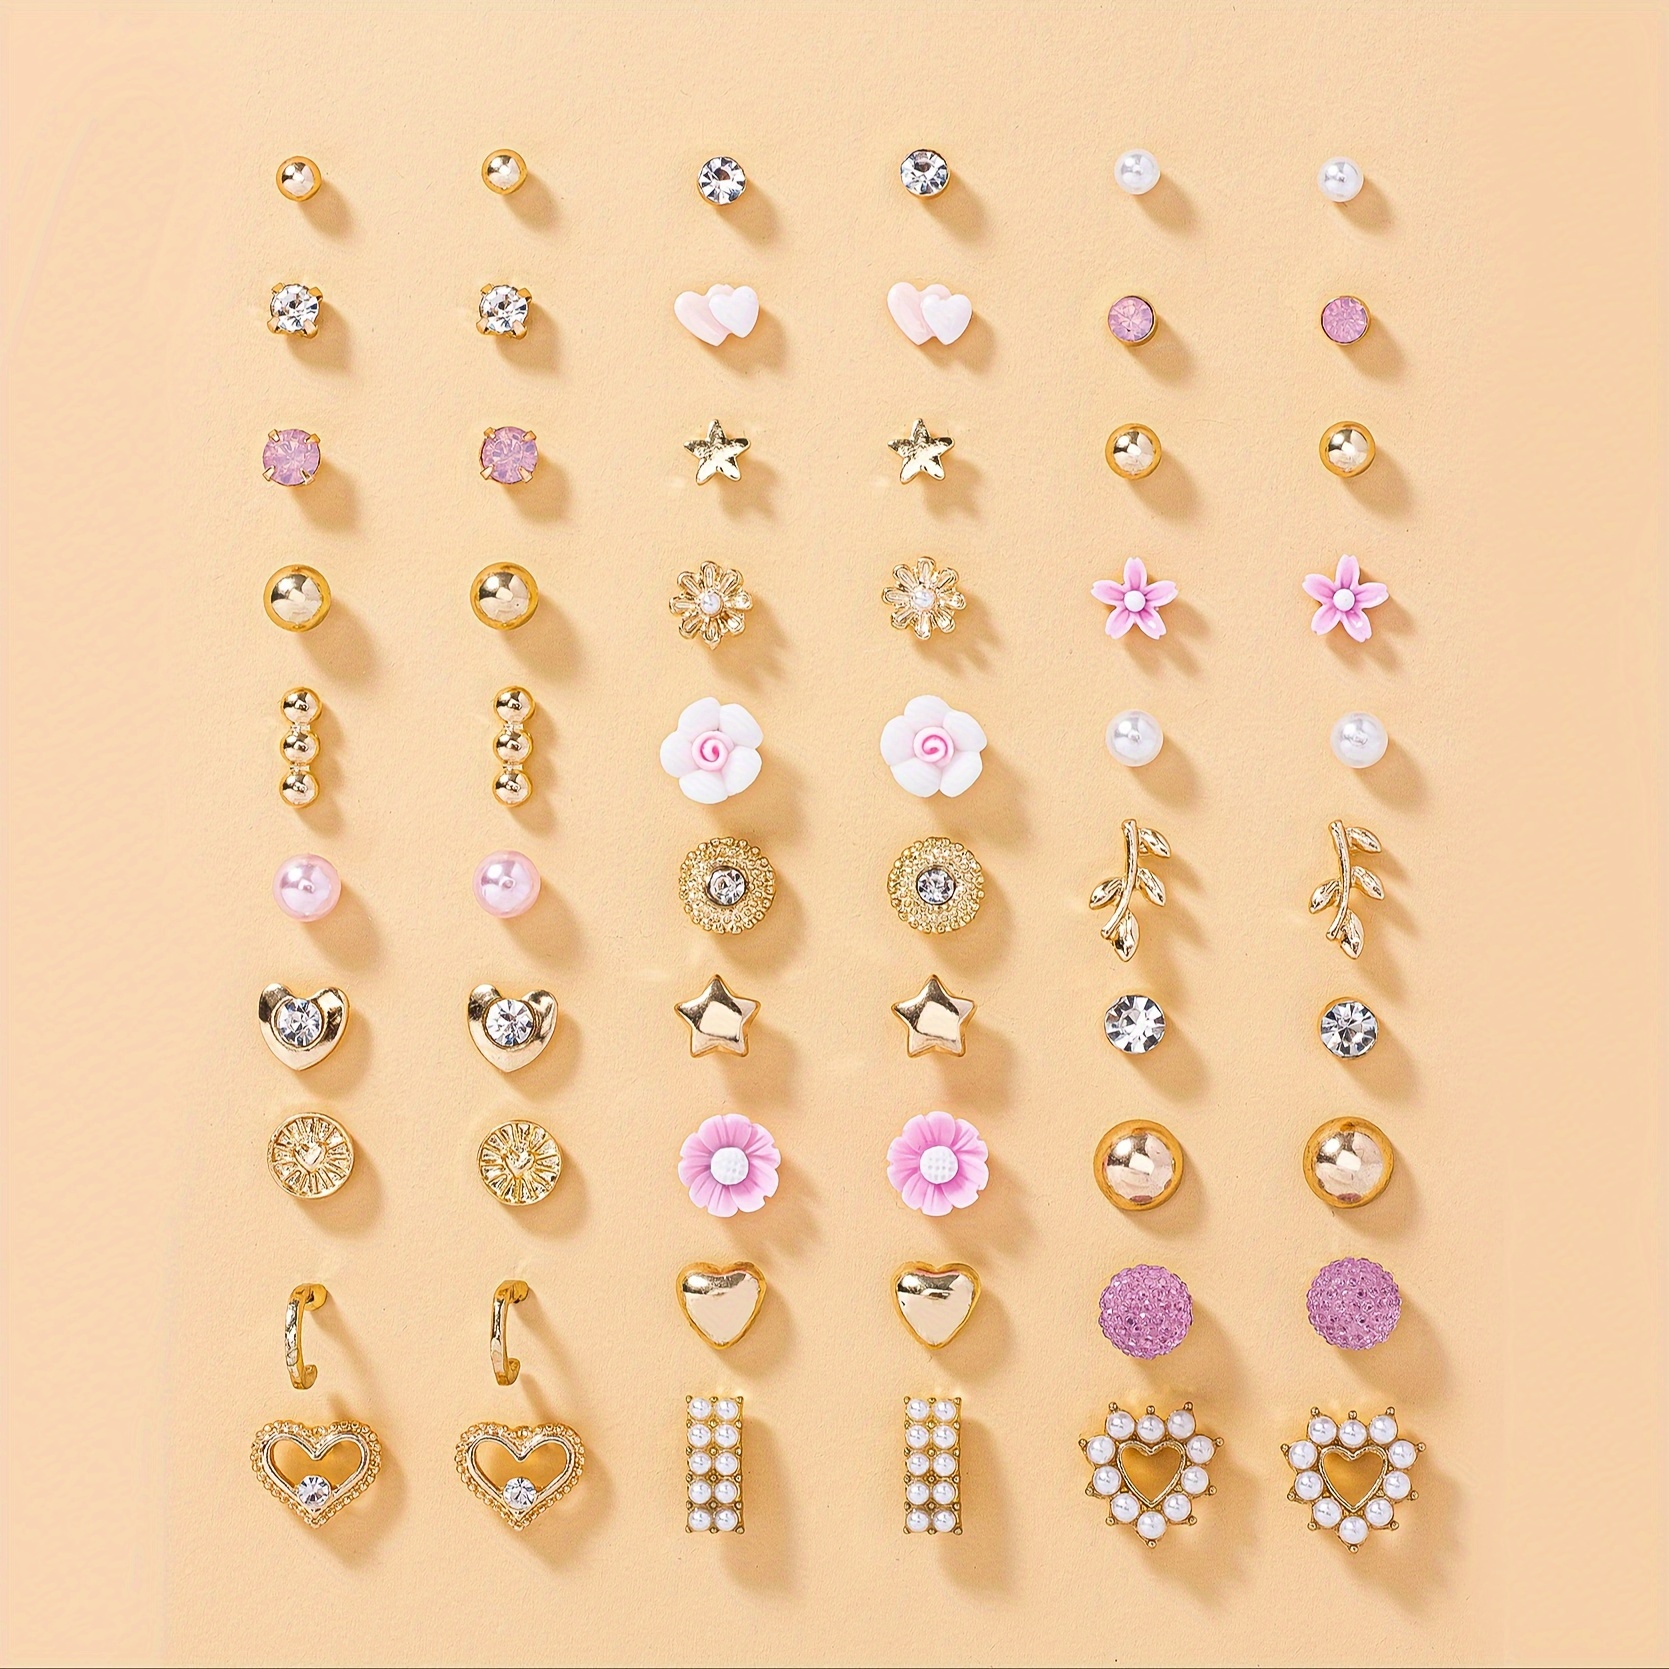 

30 Pairs Set Of Colorful Tiny Stud Earrings Zinc Alloy Jewelry With Rhinestone Inlaid Cute Simple Female Earrings For Daily Wear